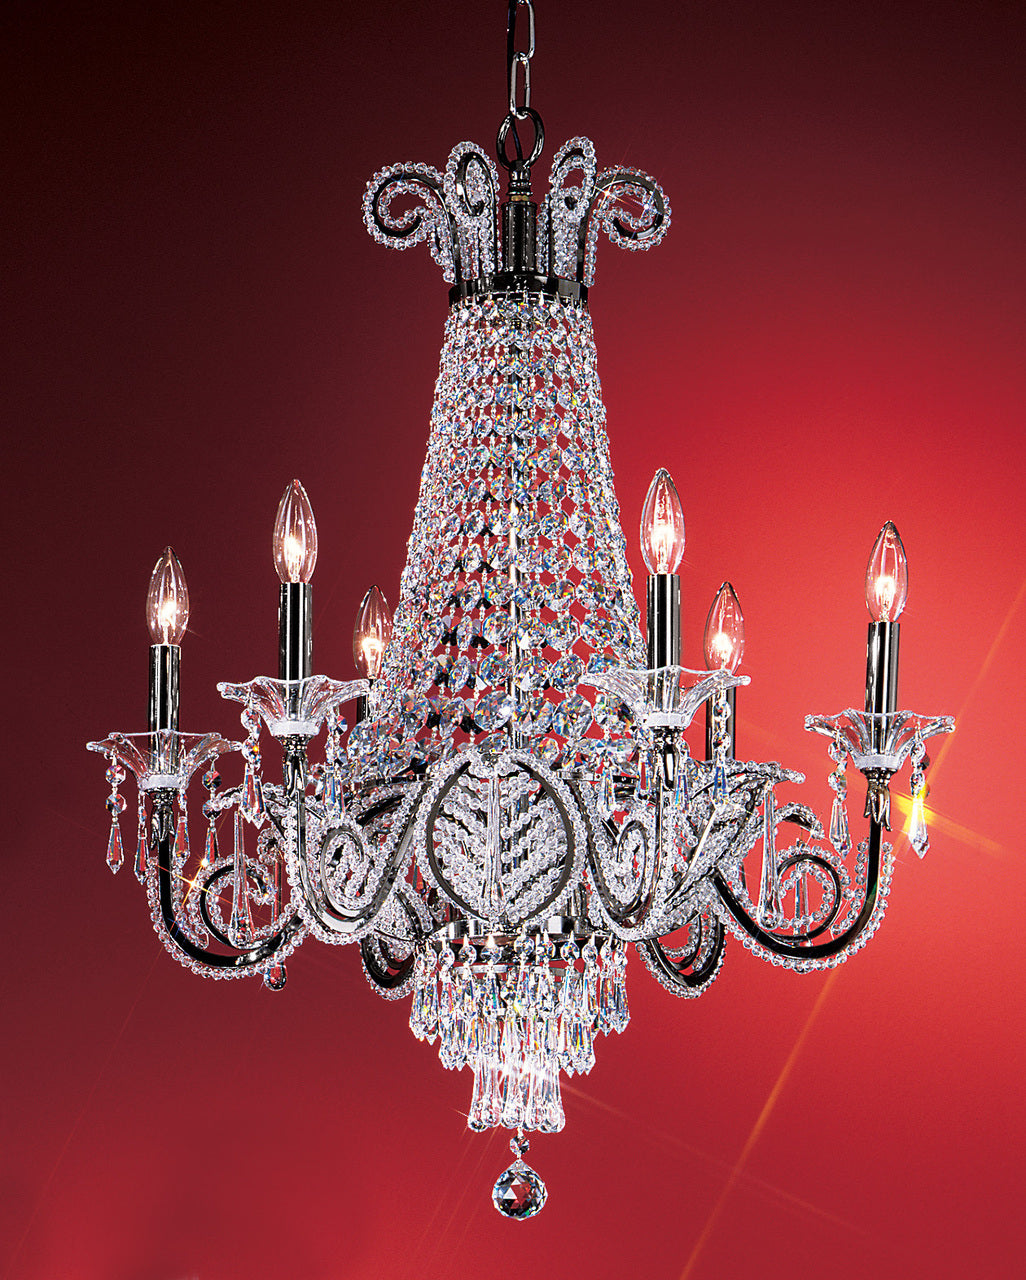 Classic Lighting 69756 EP DCL S Beaded Leaf Crystal Chandelier in Ebony Pearl